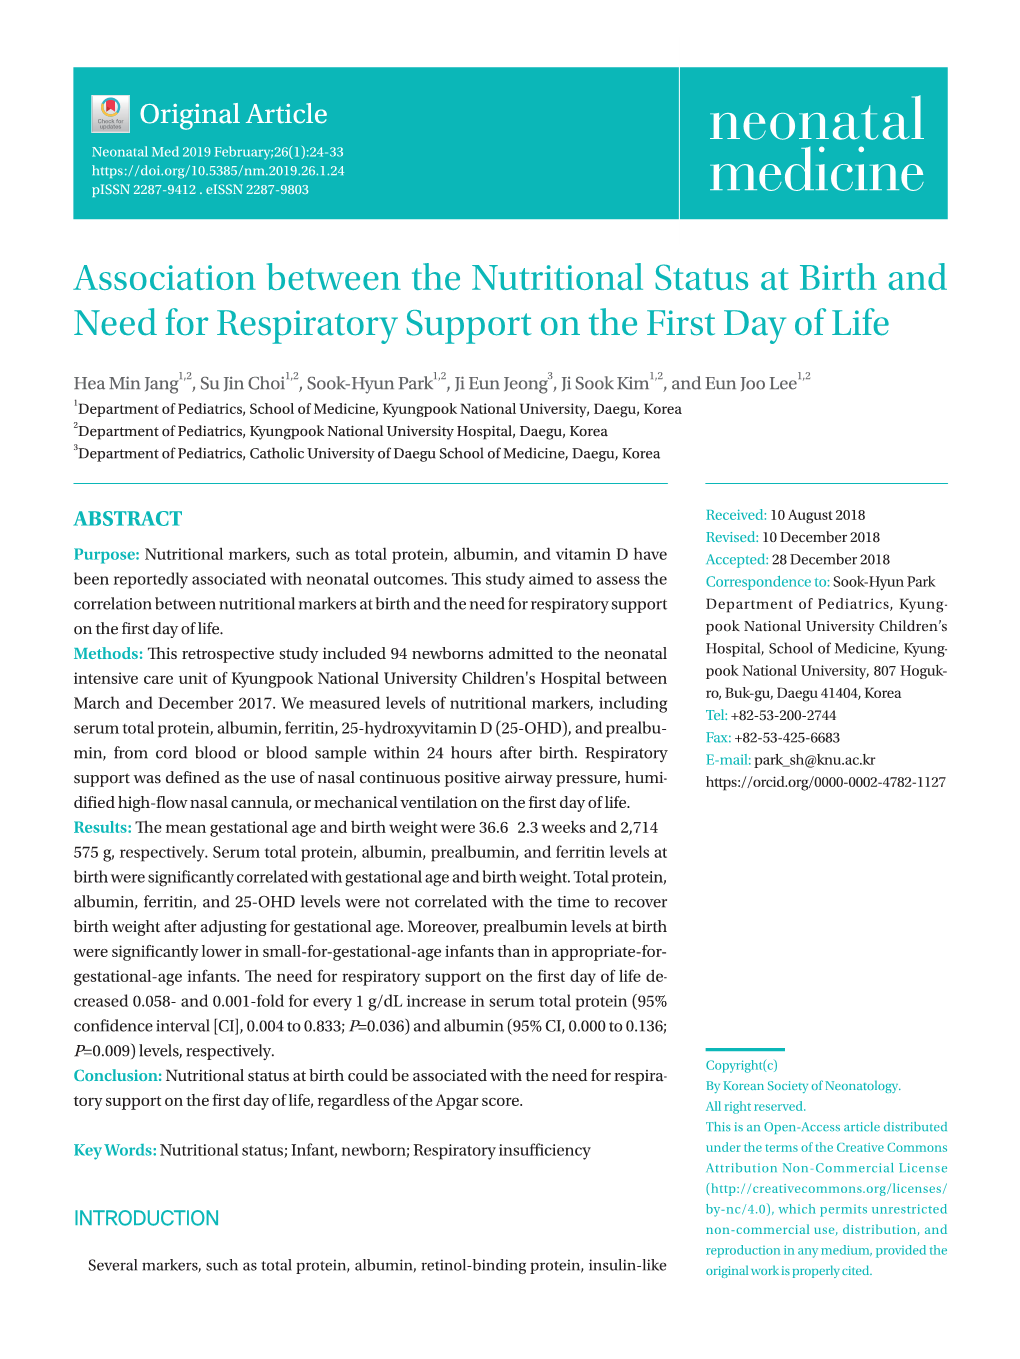 Association Between the Nutritional Status at Birth and Need for Respiratory Support on the First Day of Life